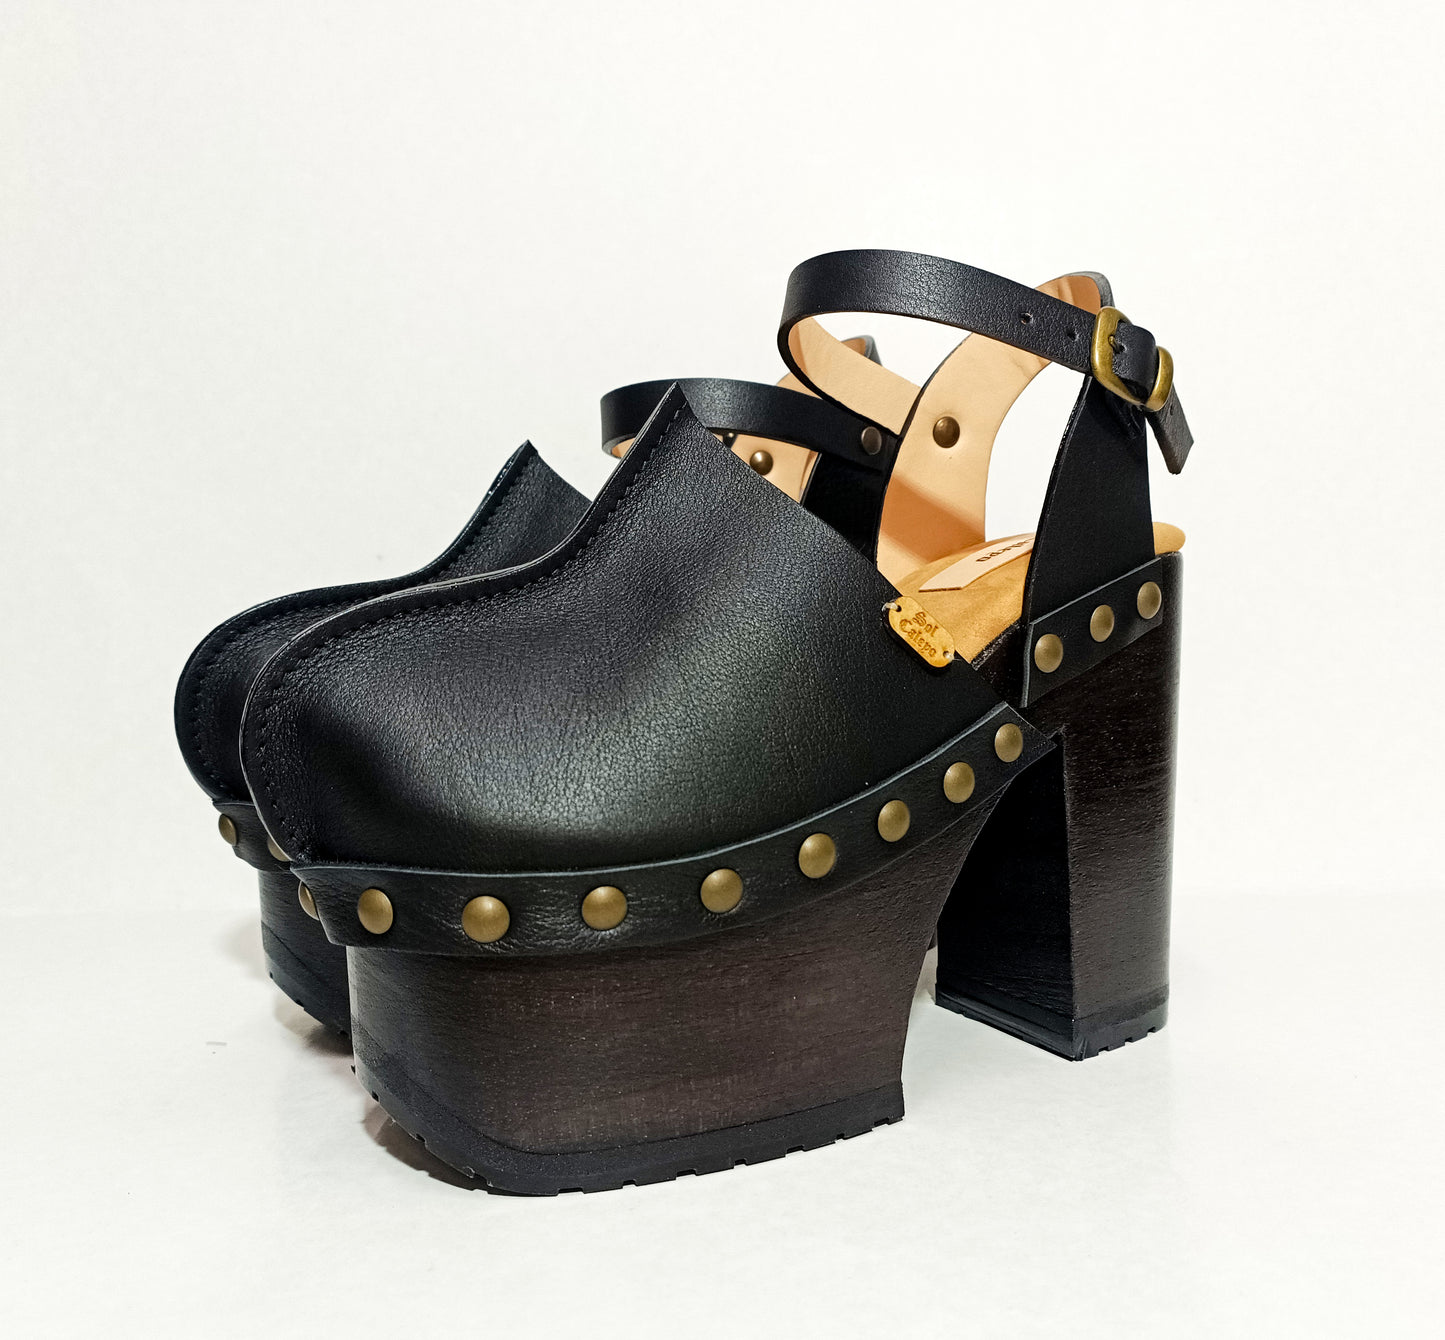 Platform clogs with super high heel and vintage 70s style. Black leather clogs vintage style. Super high wooden heel. Sizes 34 to 47. High quality handmade leather shoes.